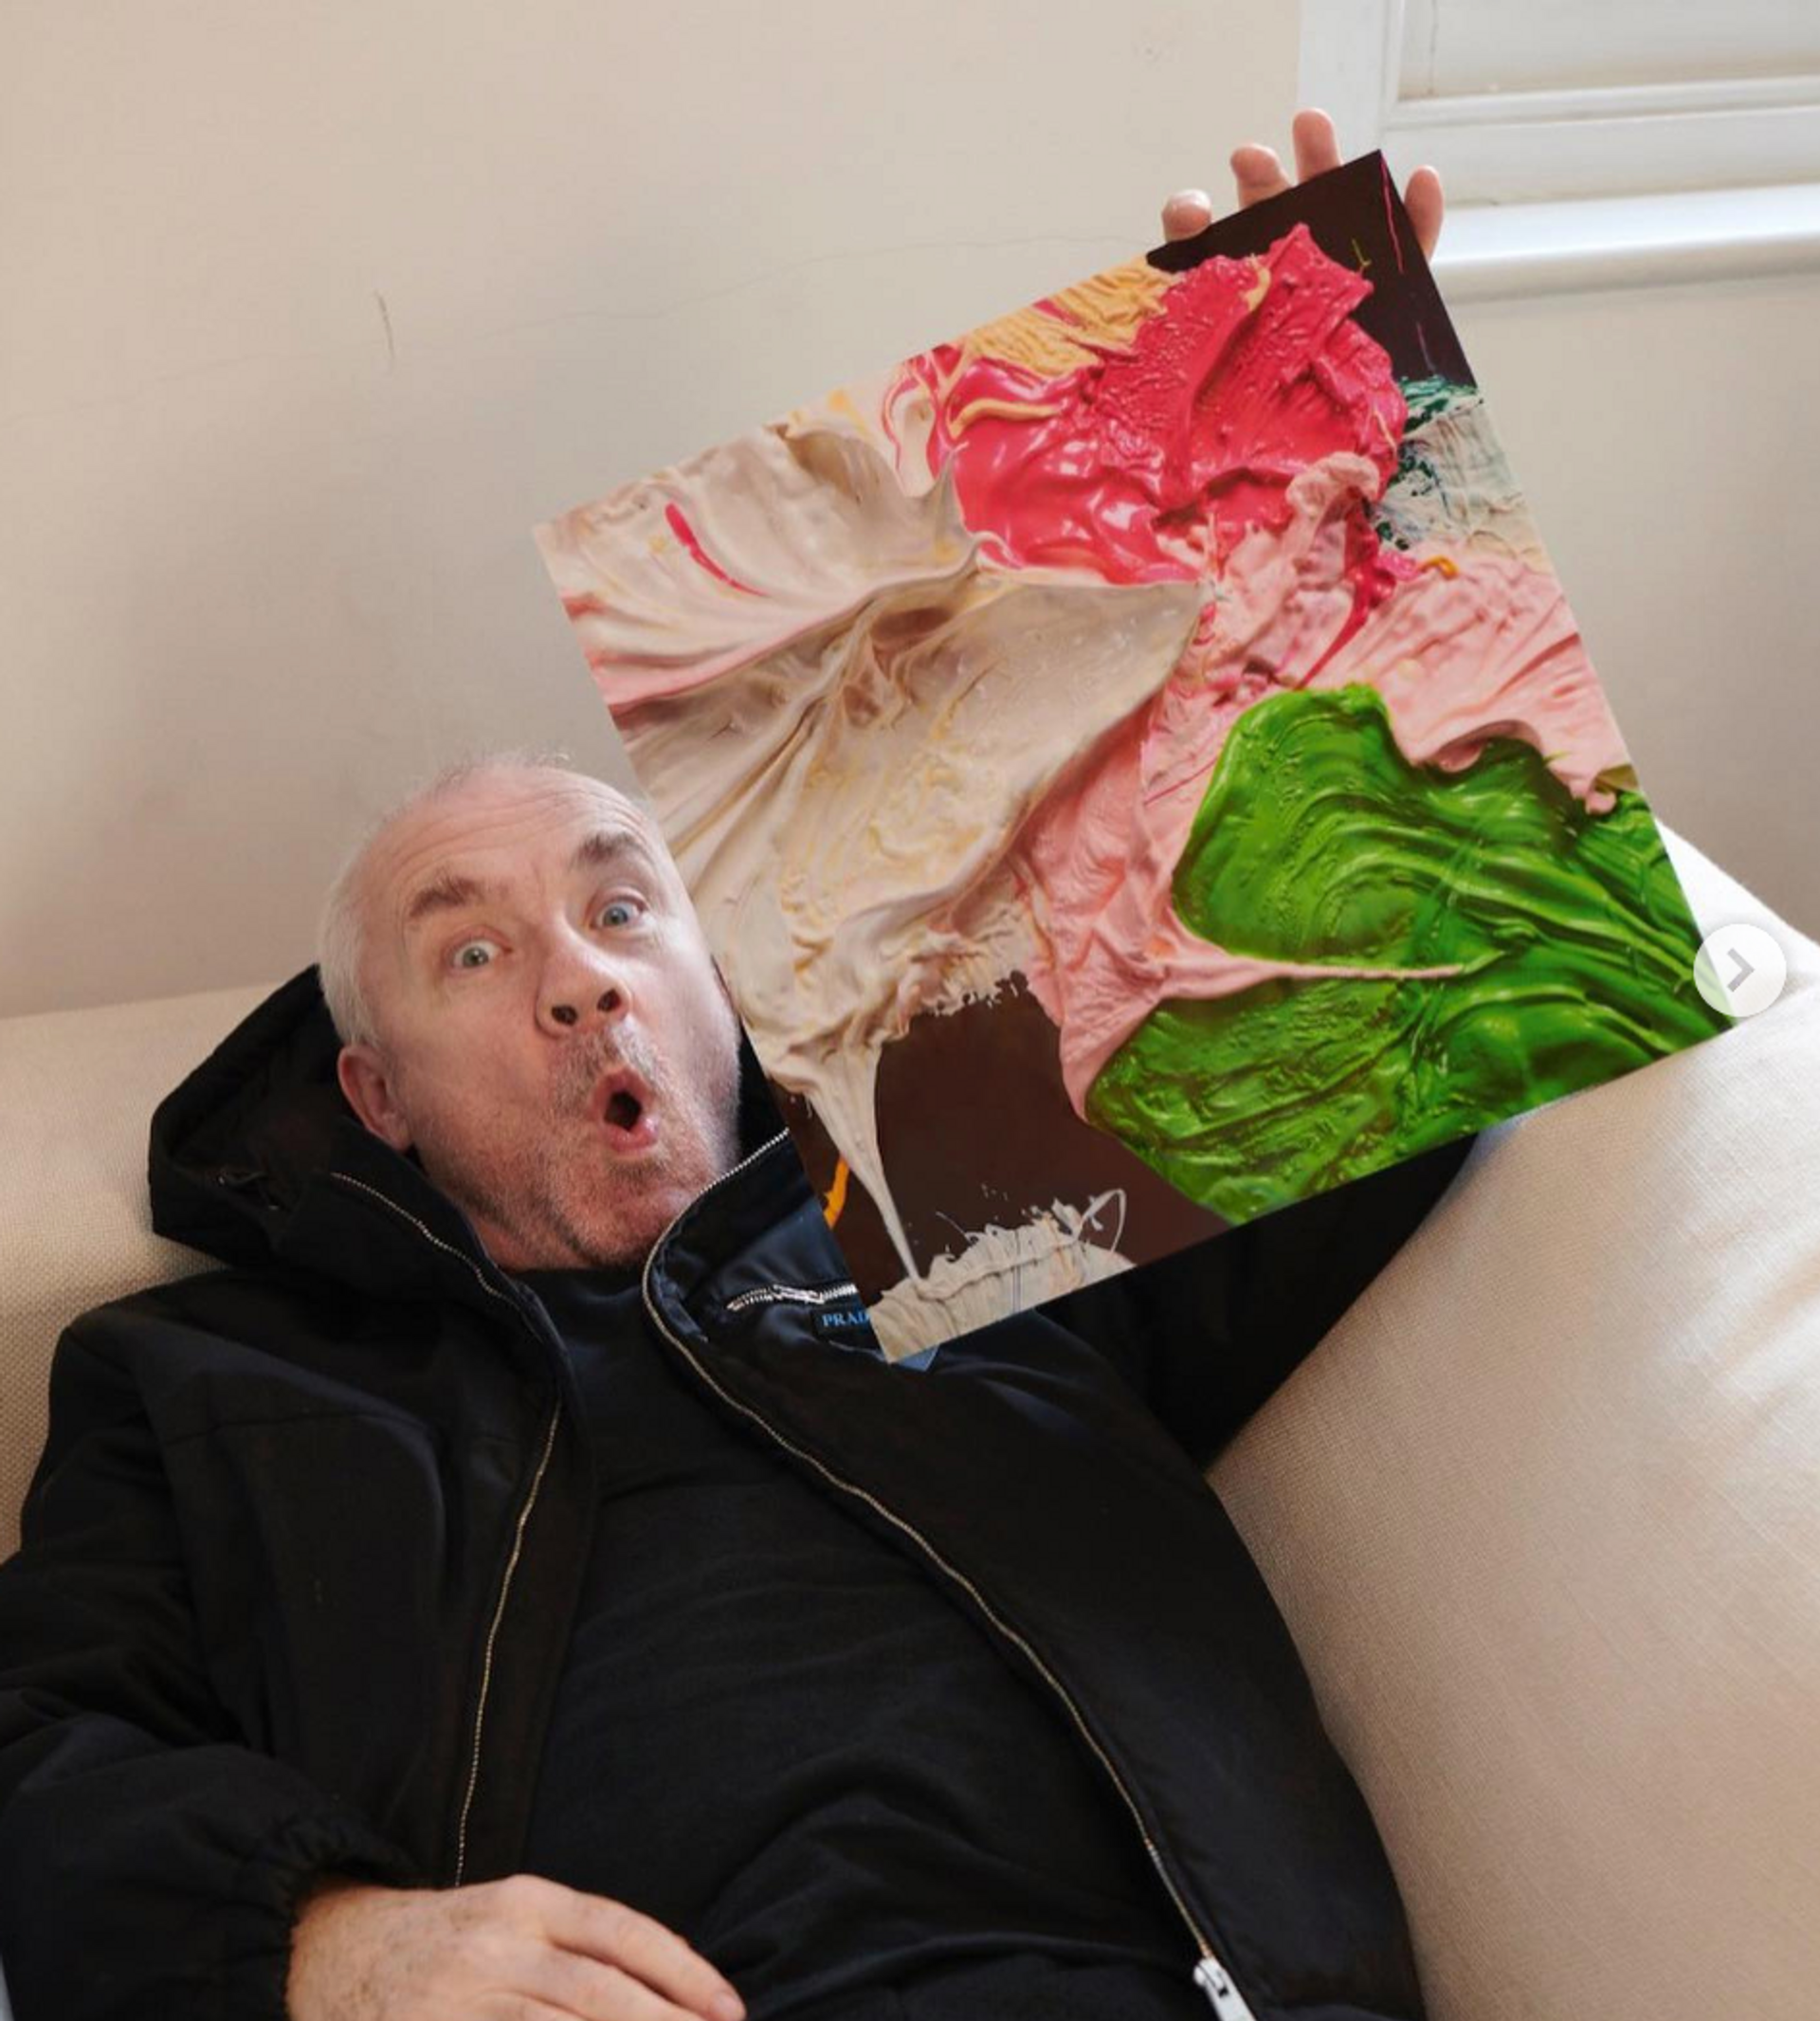 An image of the artist Damien Hirst holding up one of his works from the Fruitful And Forever series.